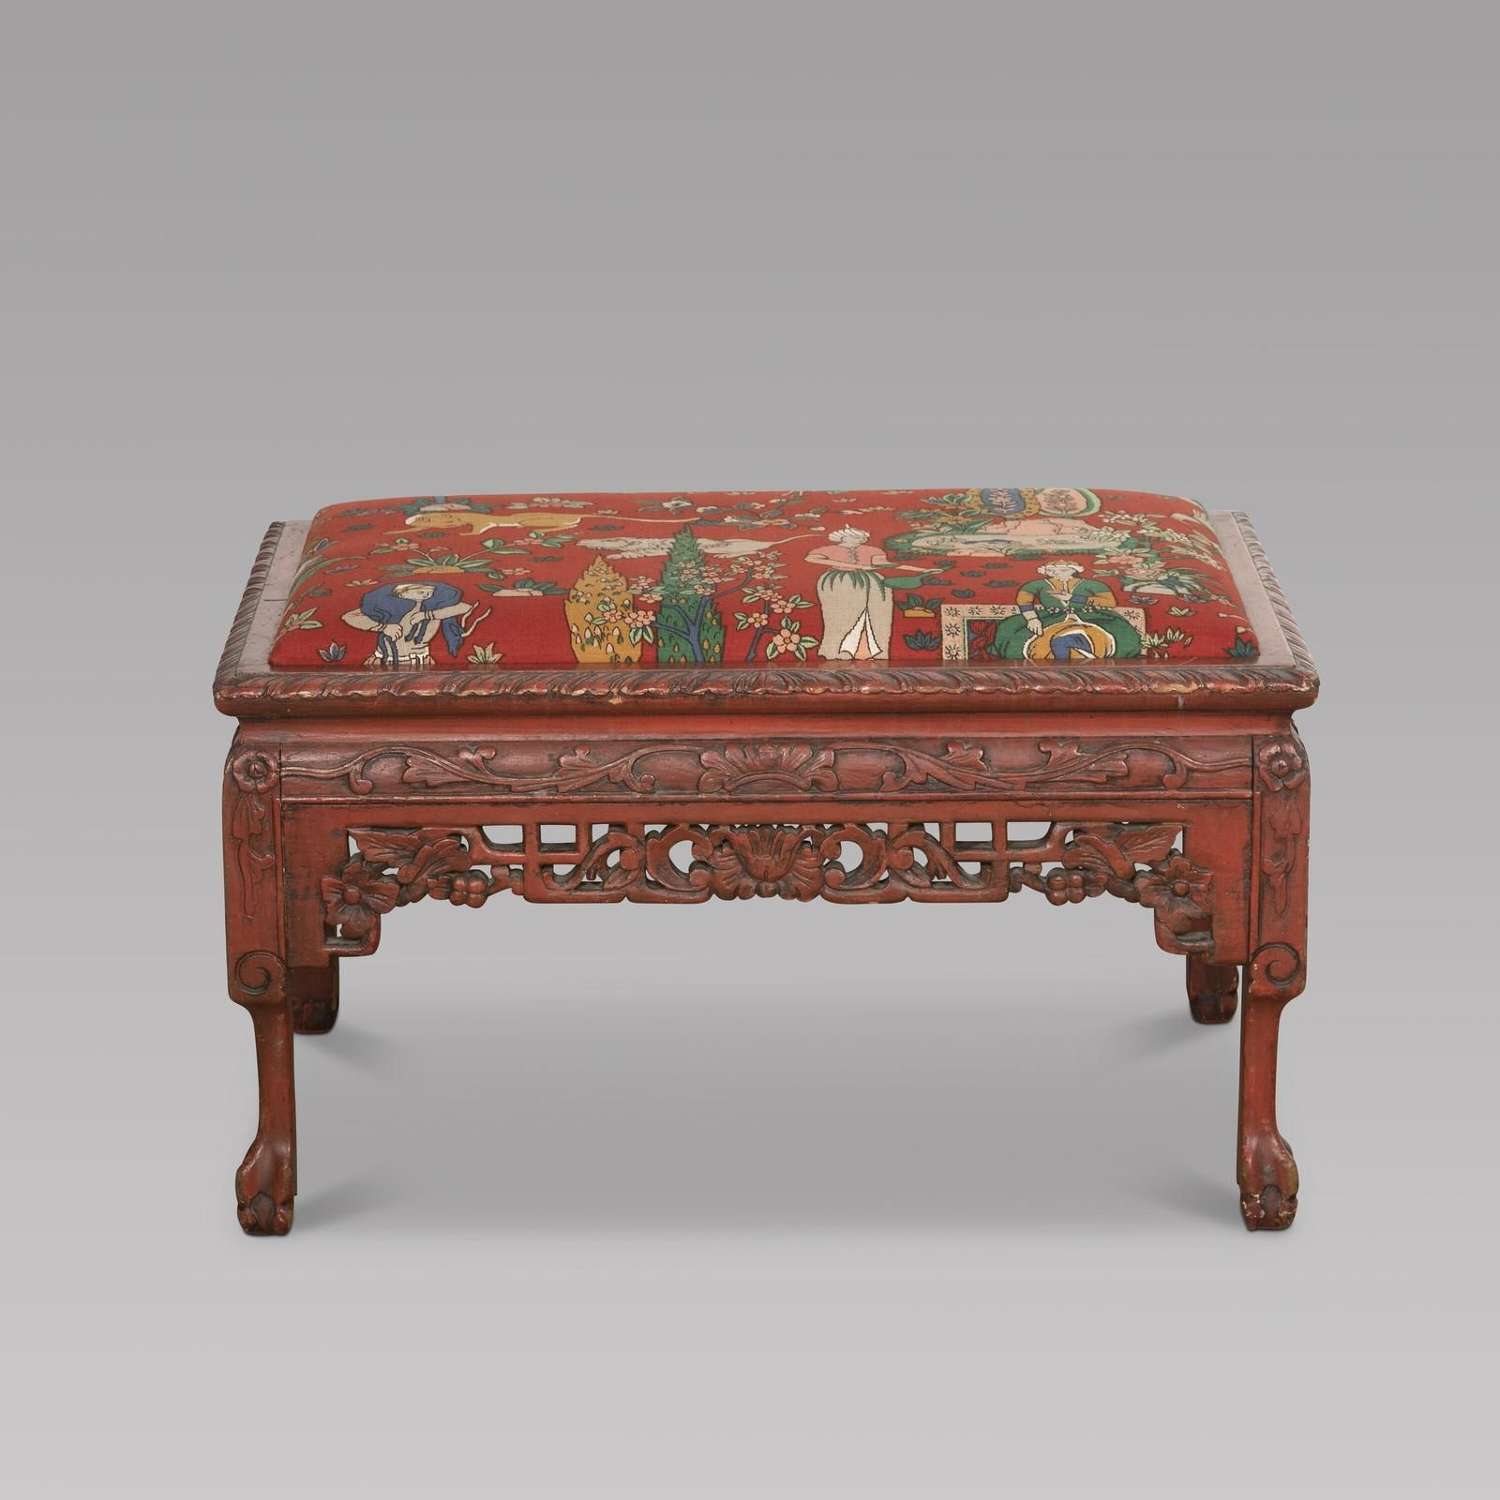 A Red Chinese Style 20th Century Stool